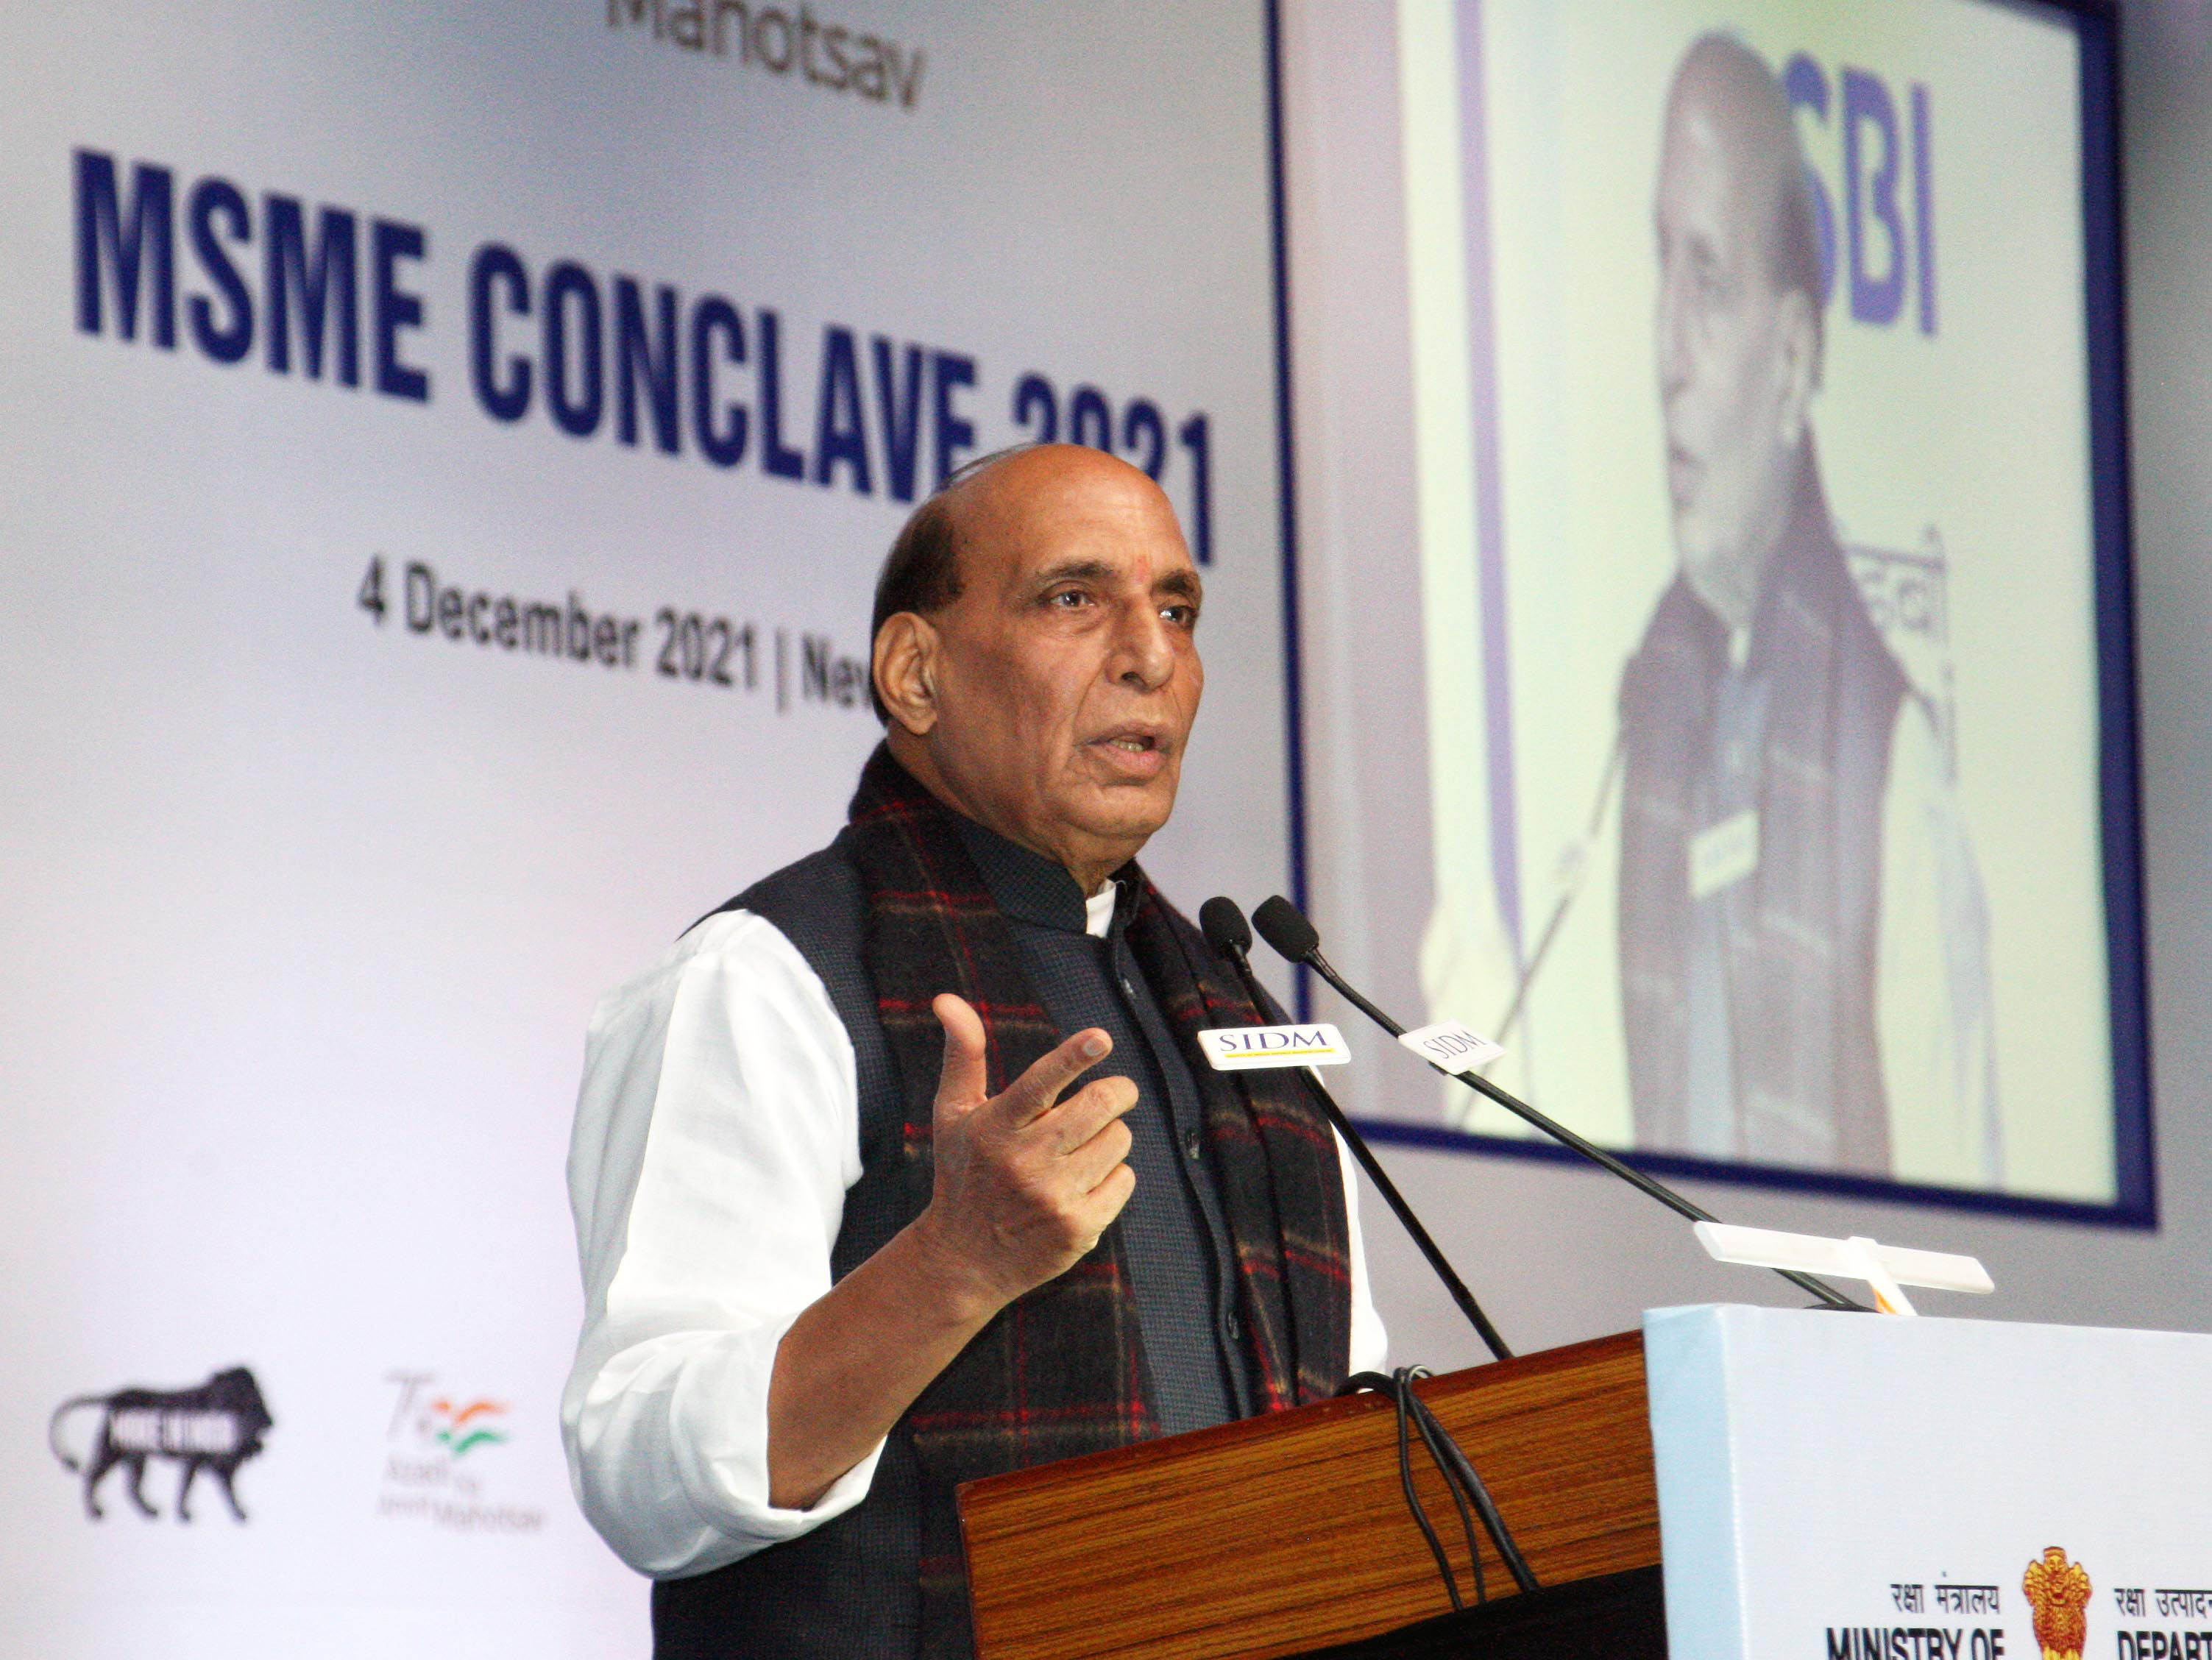 Focus on being self-reliant in defence technology: Rajnath Singh tells stakeholders